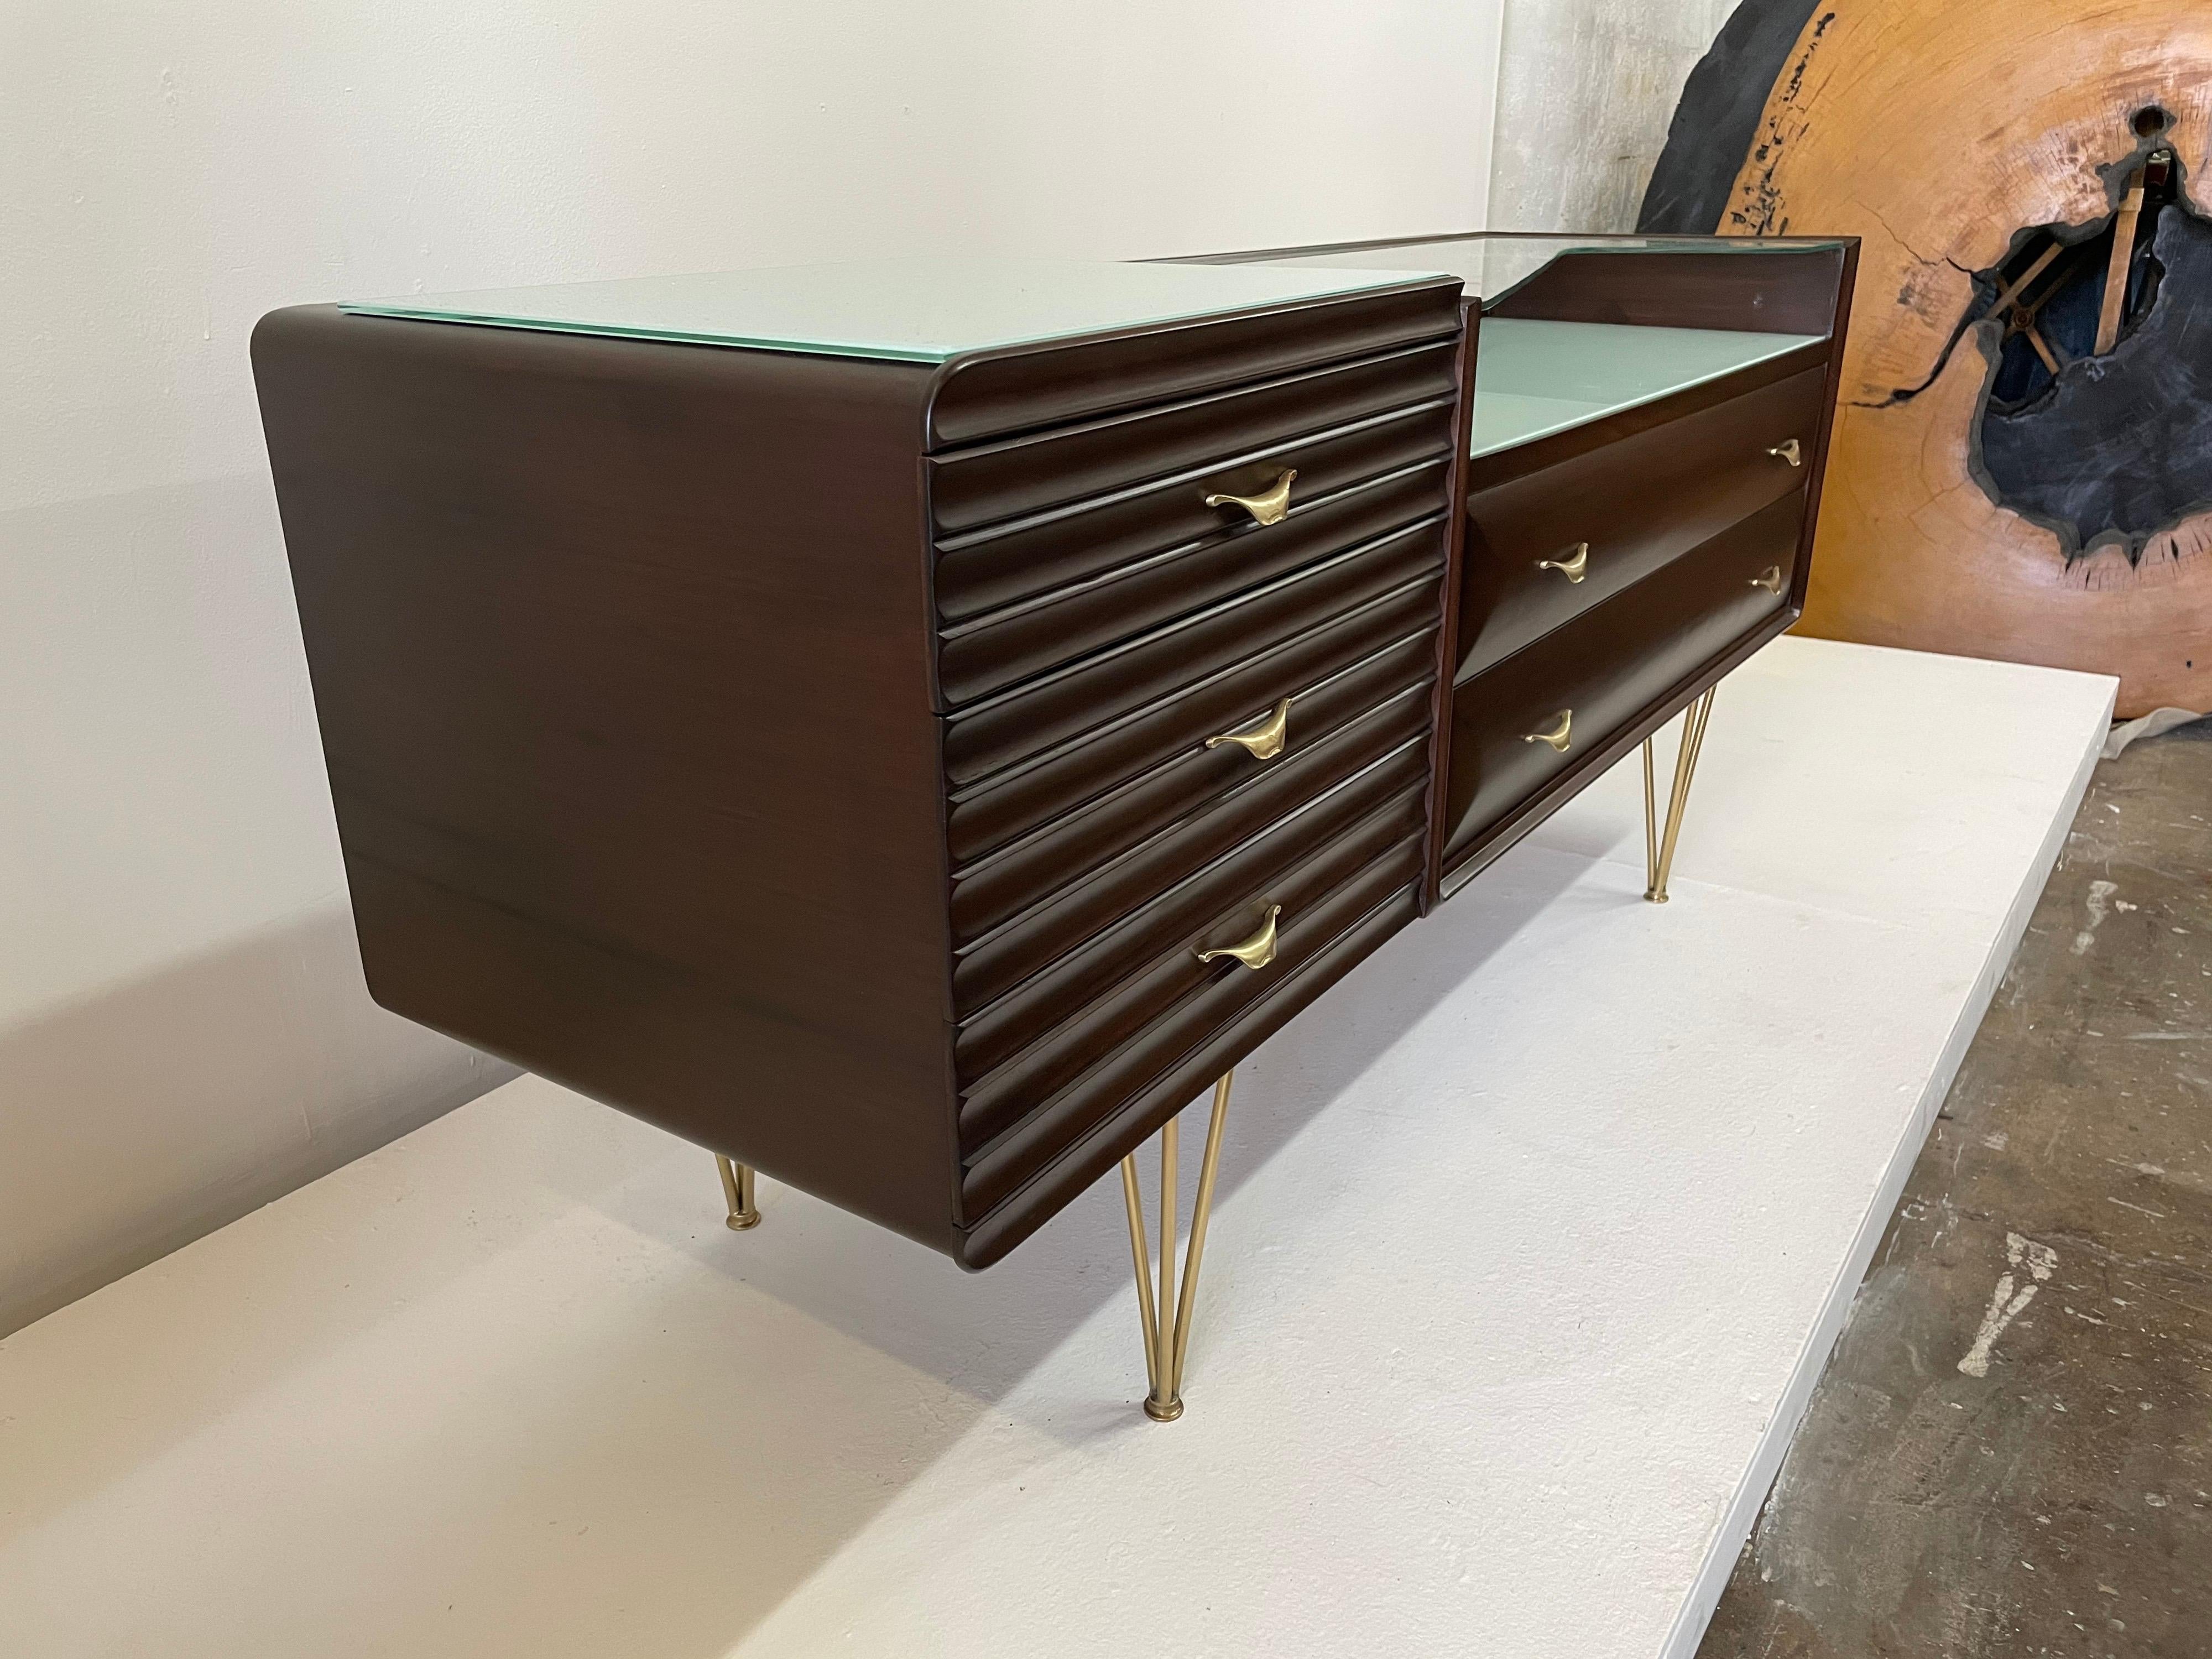 This is a truly stunningly rare cabinet with ribbed front cabinets, reverse painted plateaus in soft robins egg blue. The Hairpin brass legs and original brass pulls are hardly ever seen and this cabinet is in amazing condition. Top glass shelf is